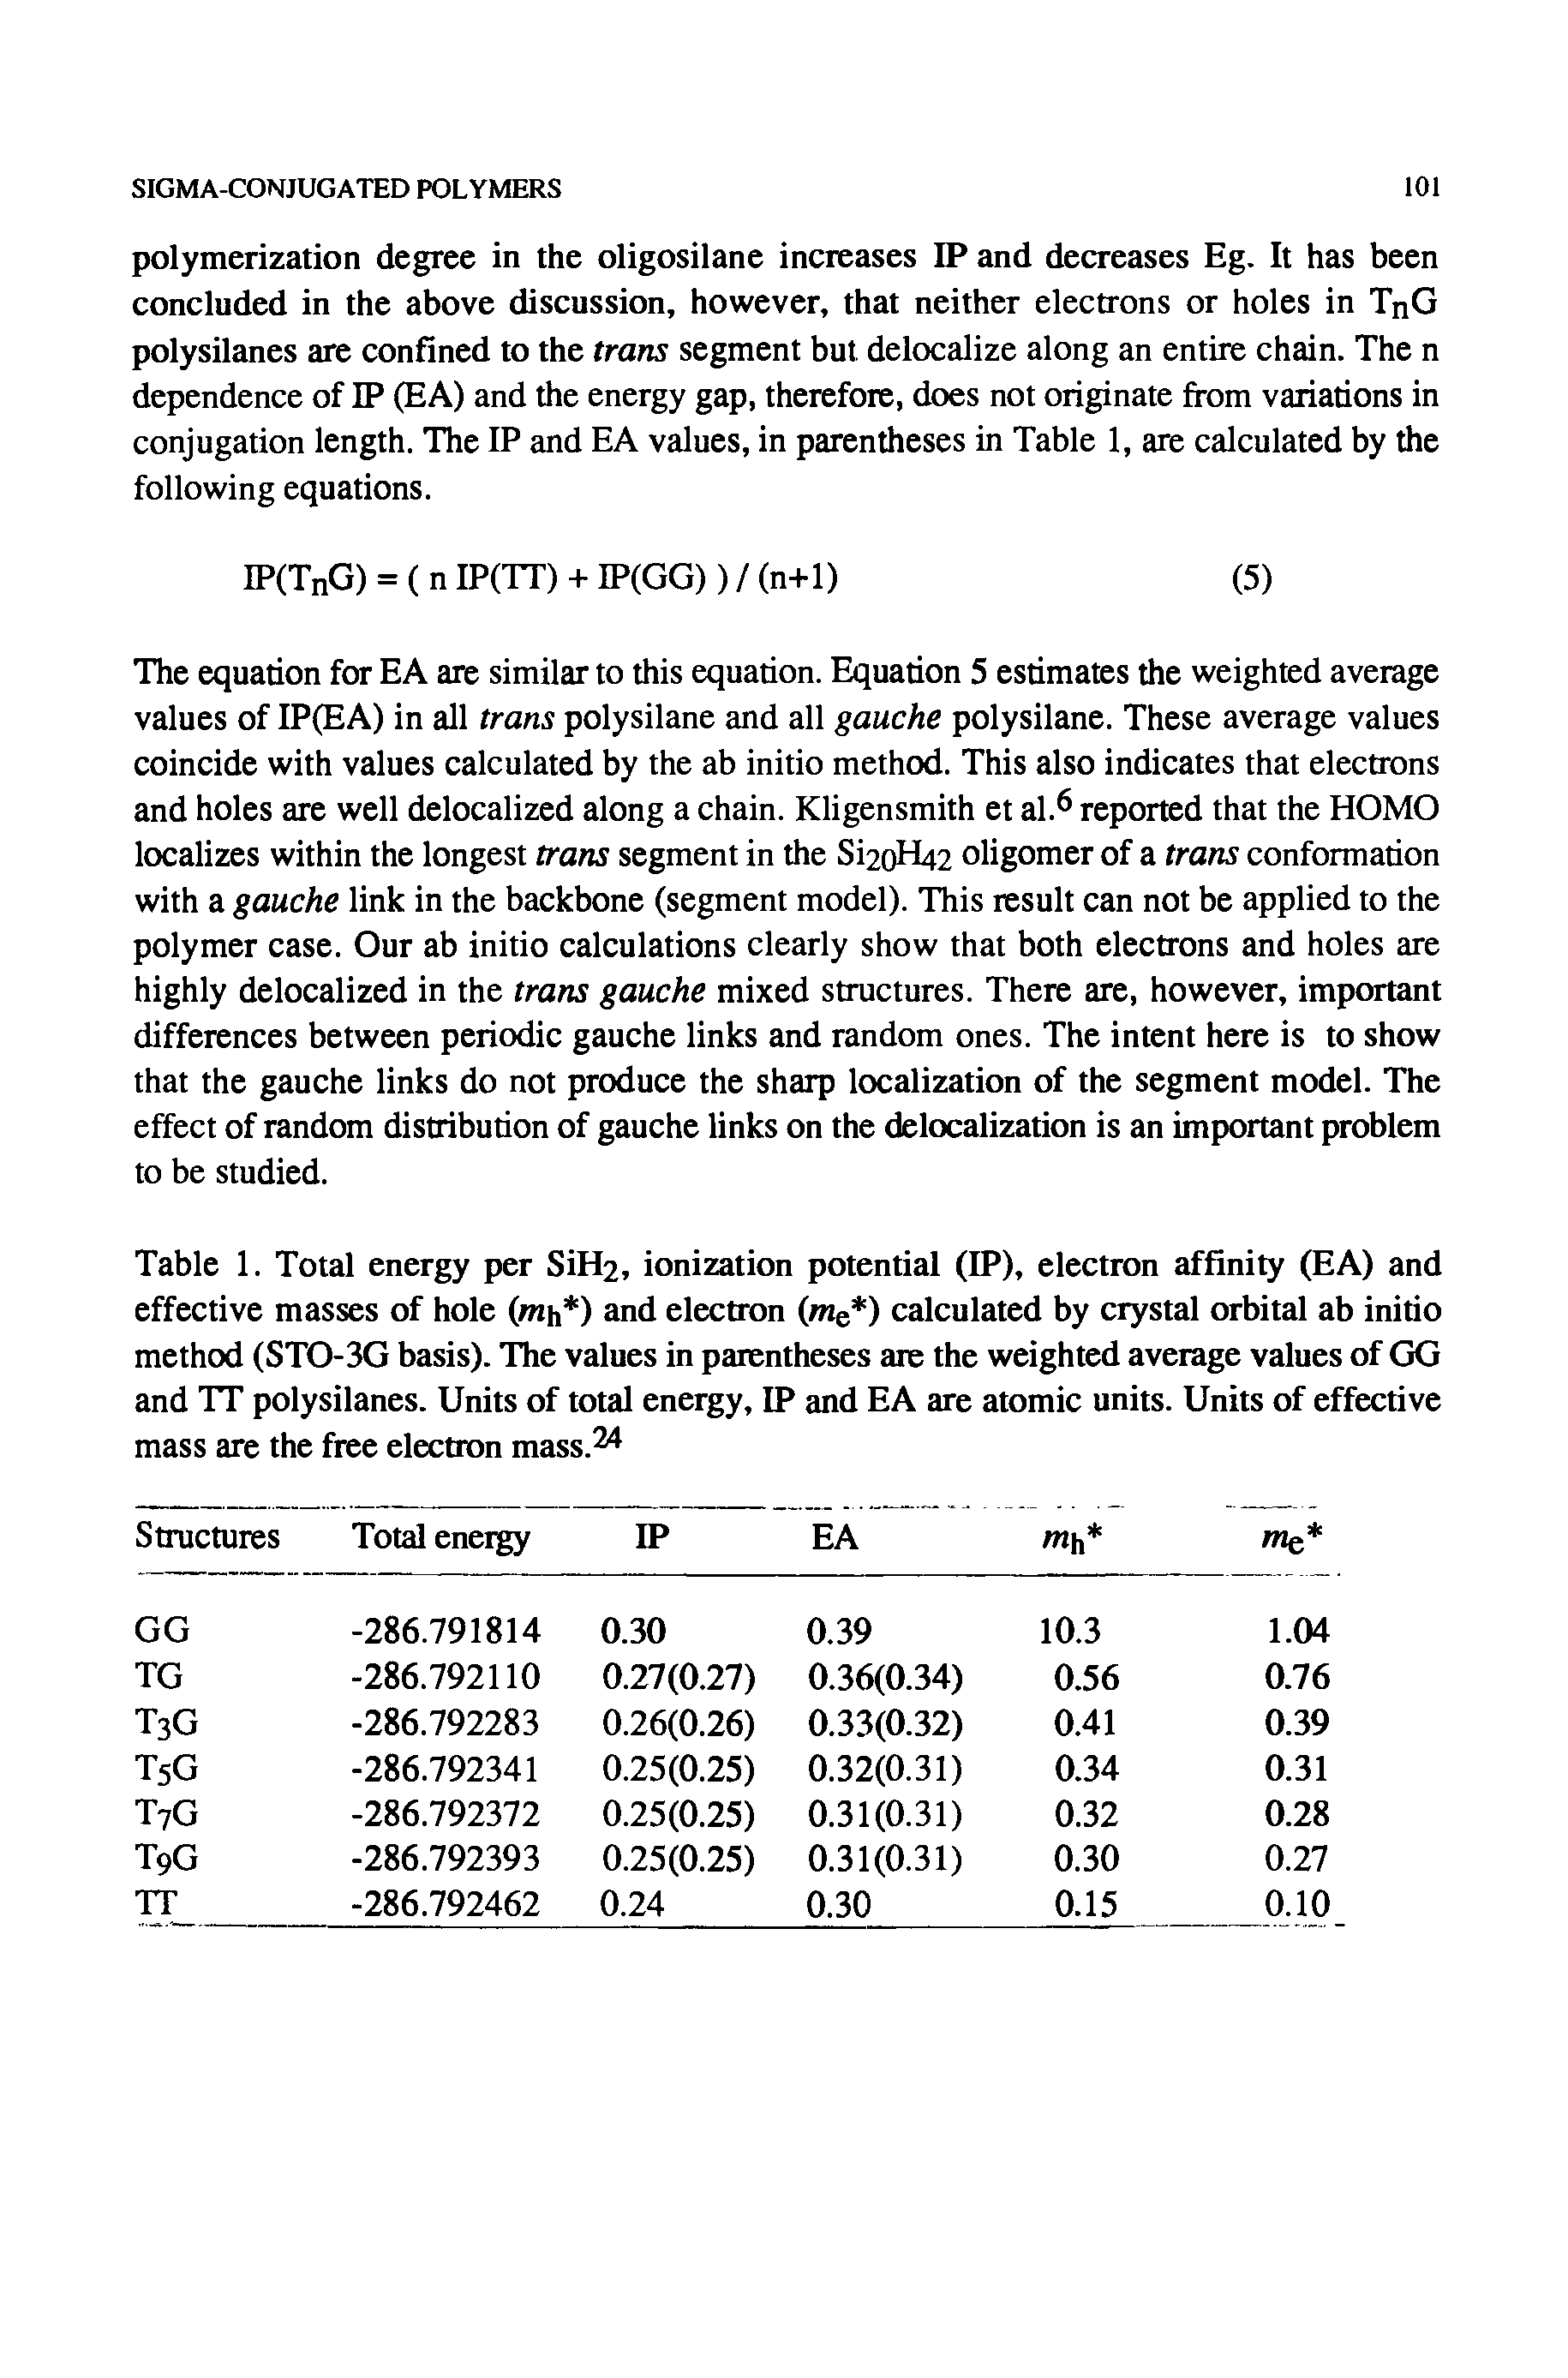 Table 1. Total energy per SiH2, ionization potential (IP), electron affinity (EA) and effective masses of hole (/ h ) and electron (me ) calculated by crystal orbital ab initio method (STO-3G basis). The values in parentheses are the weighted average values of GG and TT polysilanes. Units of total energy, IP and EA are atomic units. Units of effective mass are the free electron mass.24...